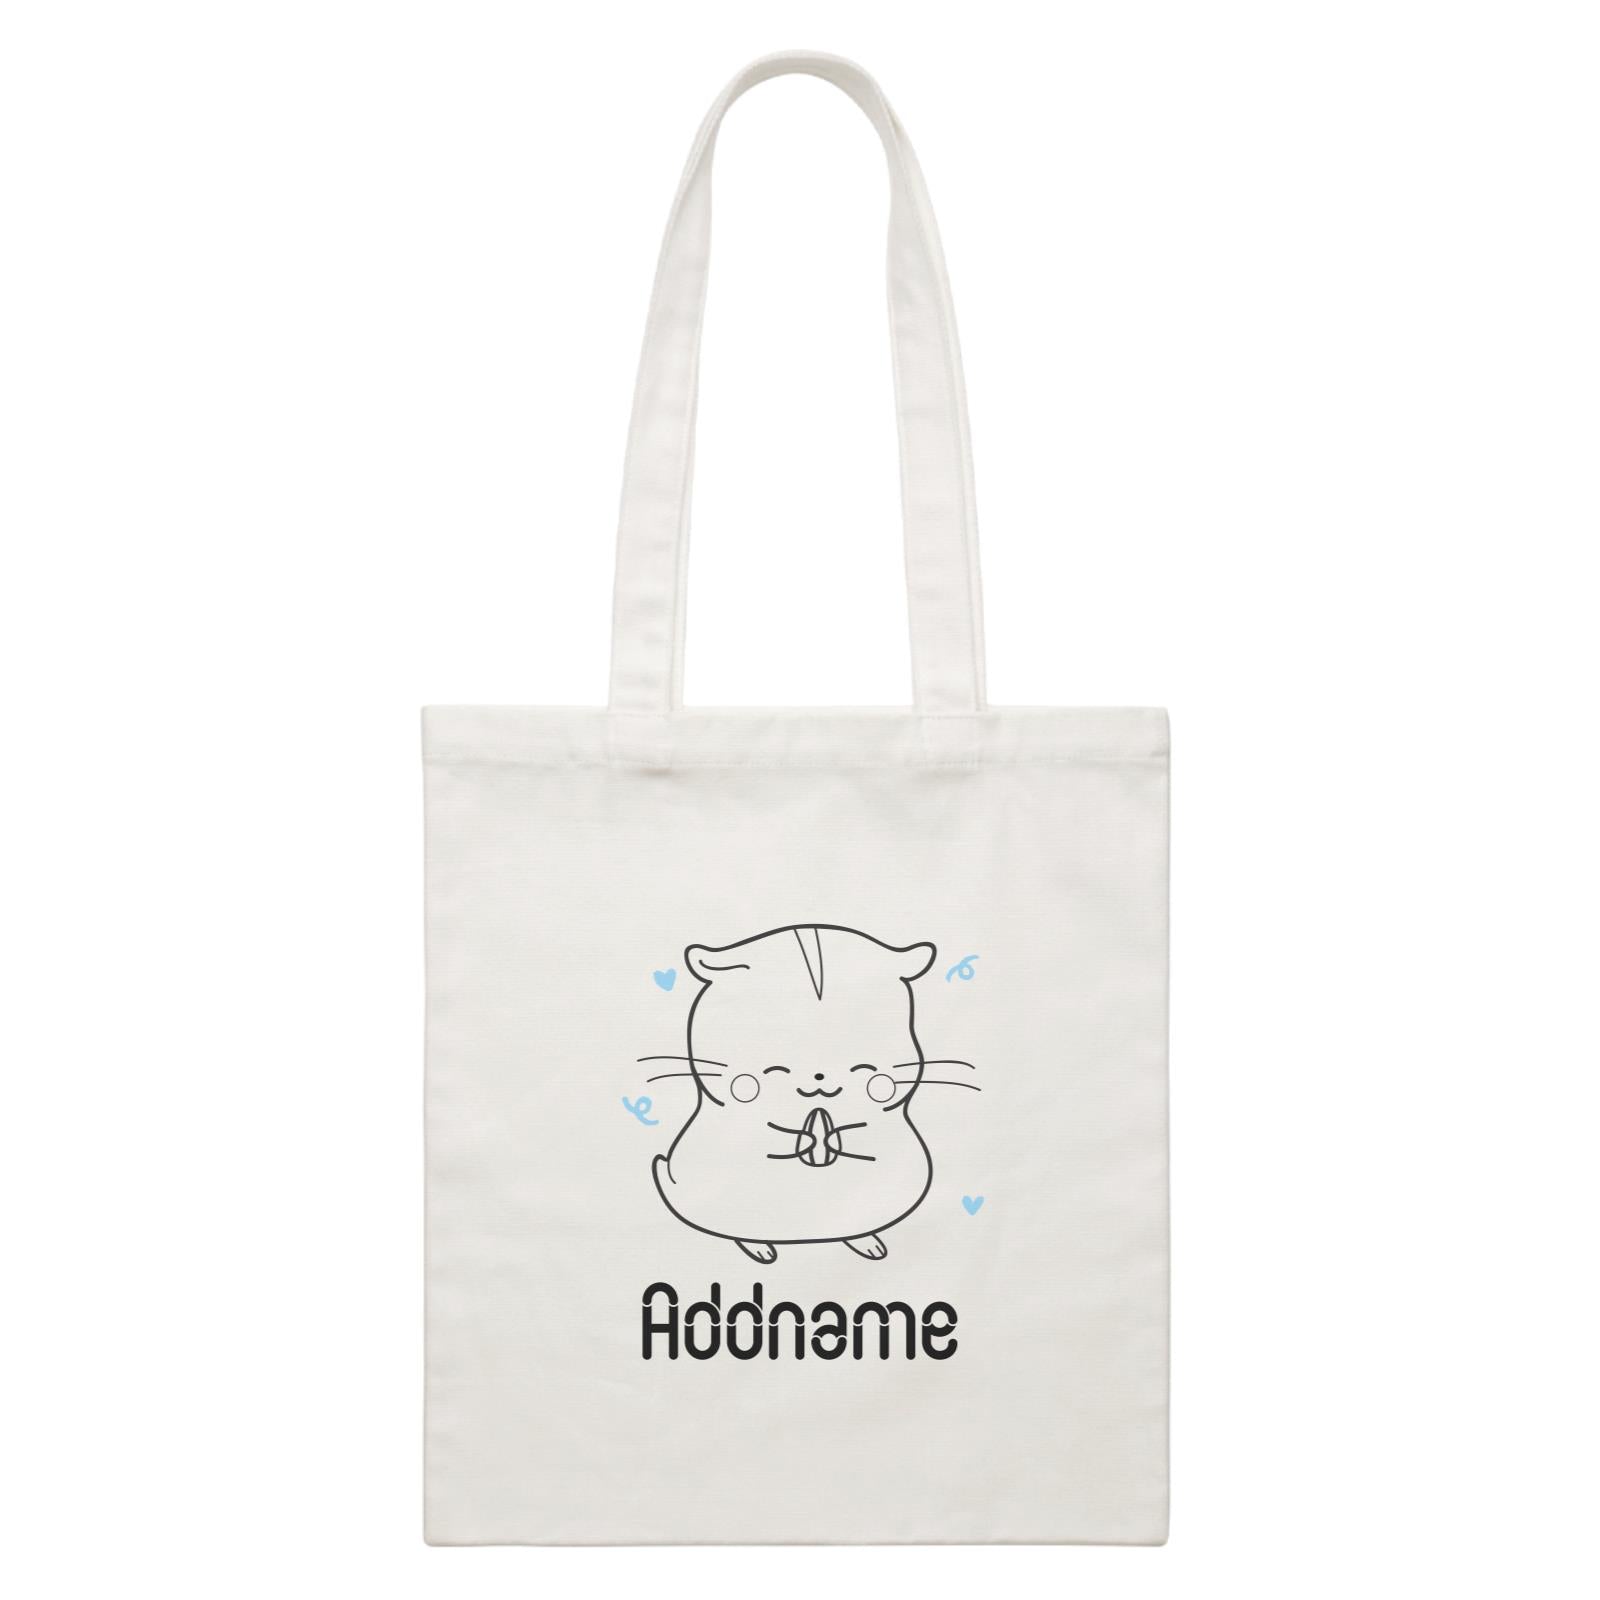 Coloring Outline Cute Hand Drawn Animals Farm Hamster Addname White White Canvas Bag